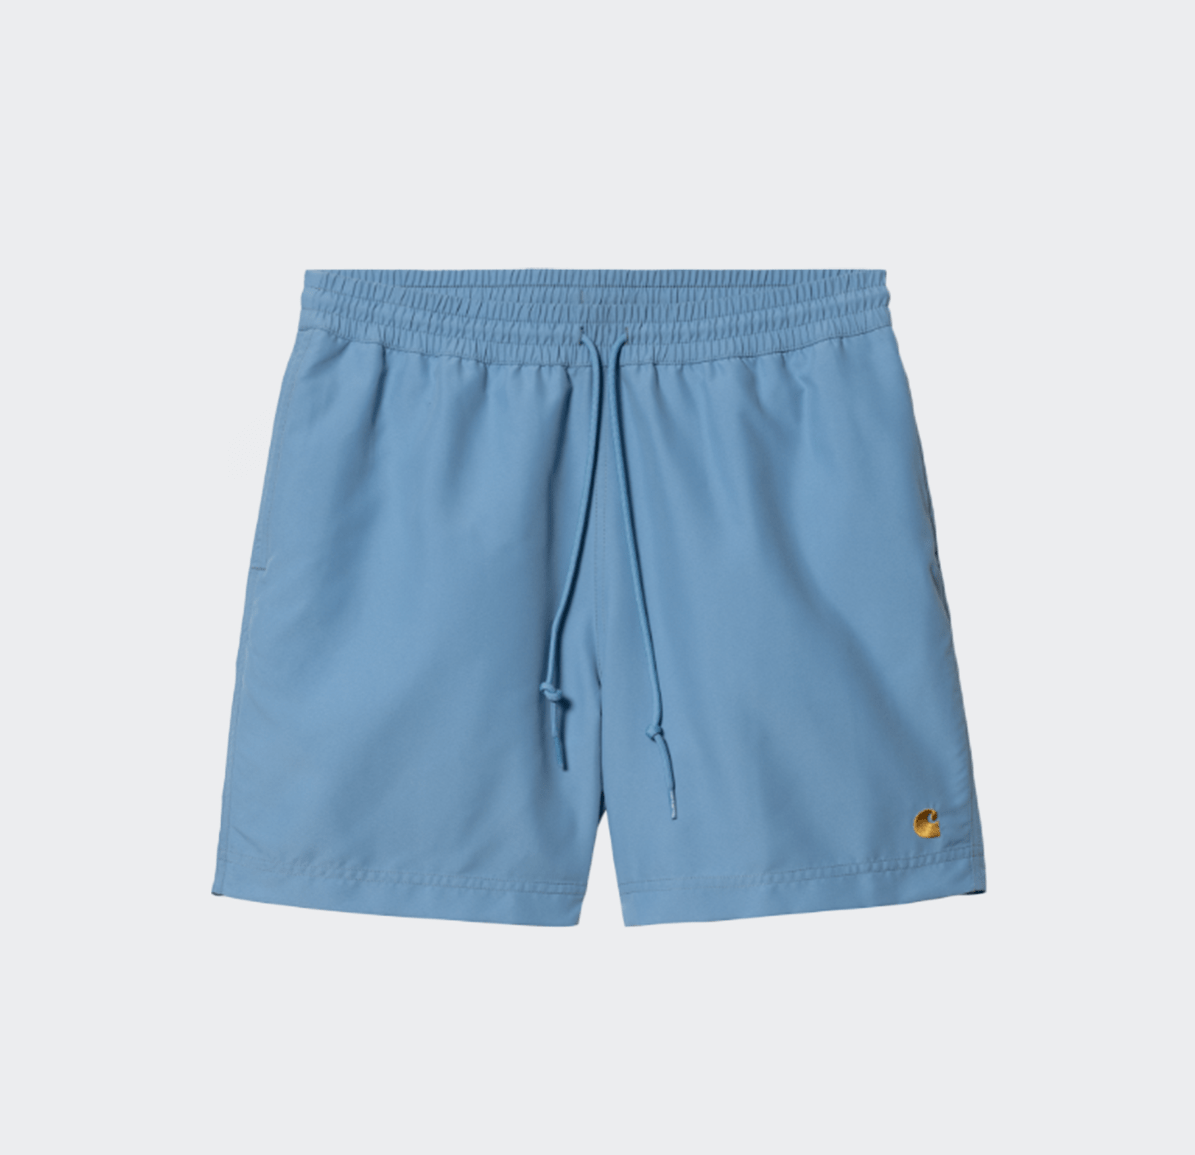 Carhartt WIP Chase Swim Trunk - Piscine/Gold - Carhartt WIP - State Of Play